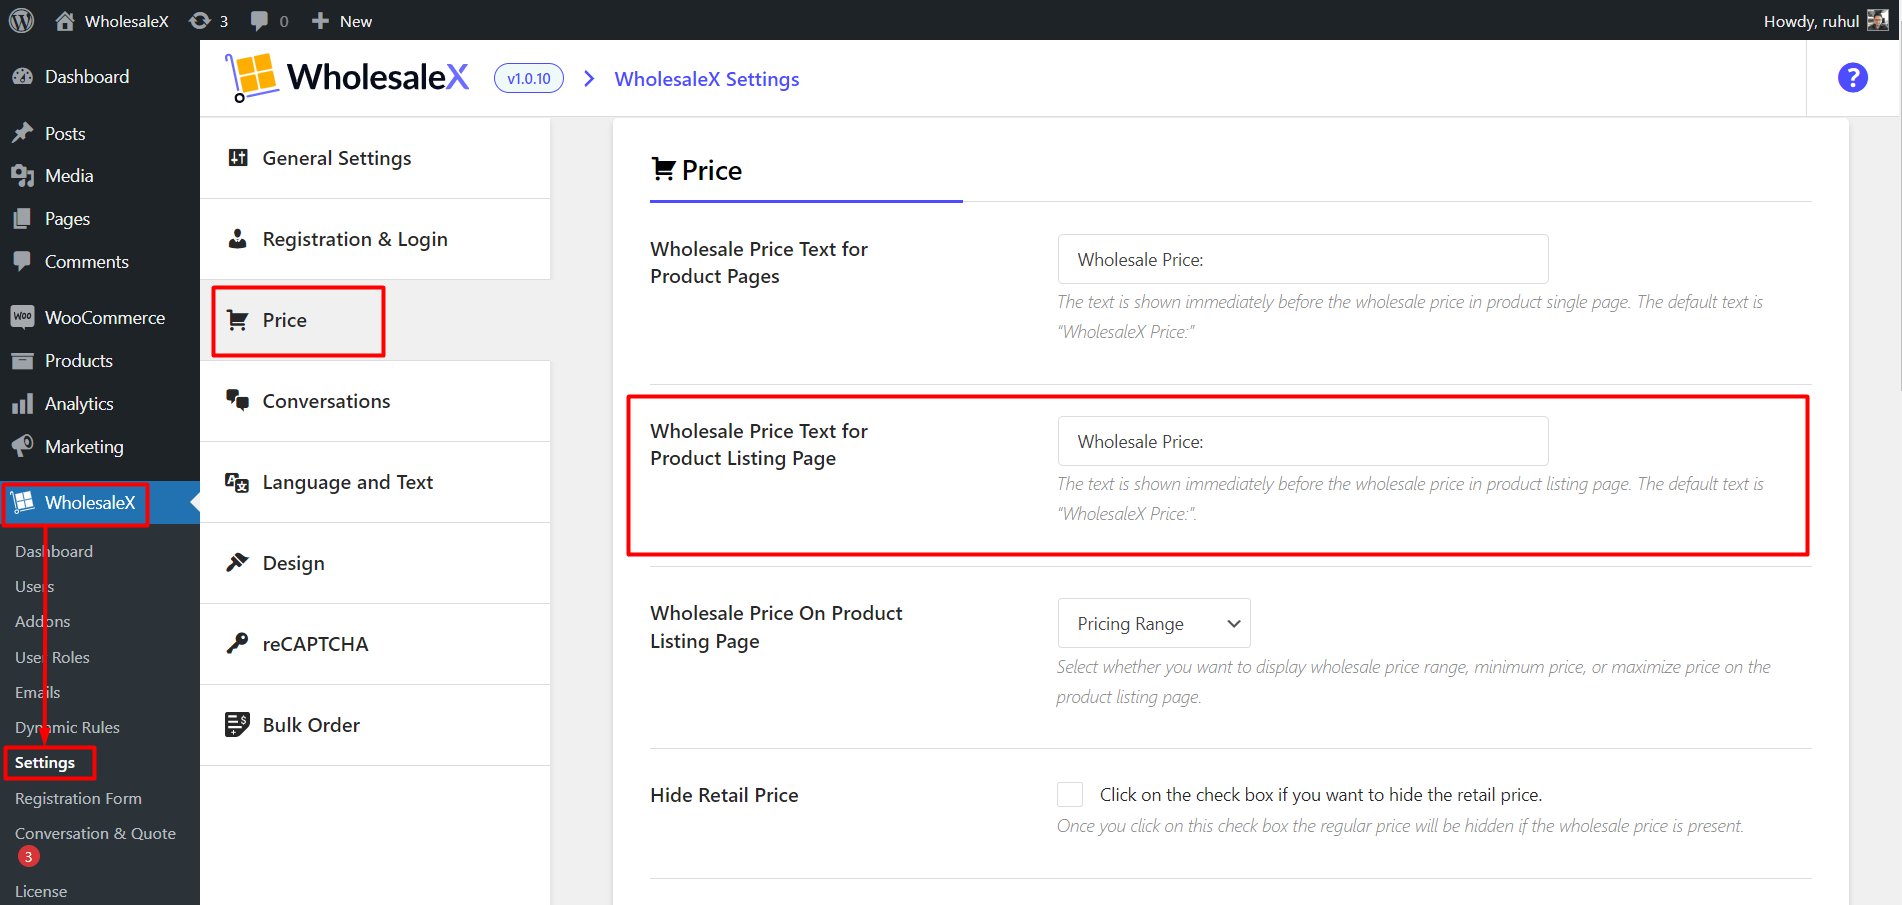 WholesaleX Modifying Wholesale Price Text in Product Listing Page